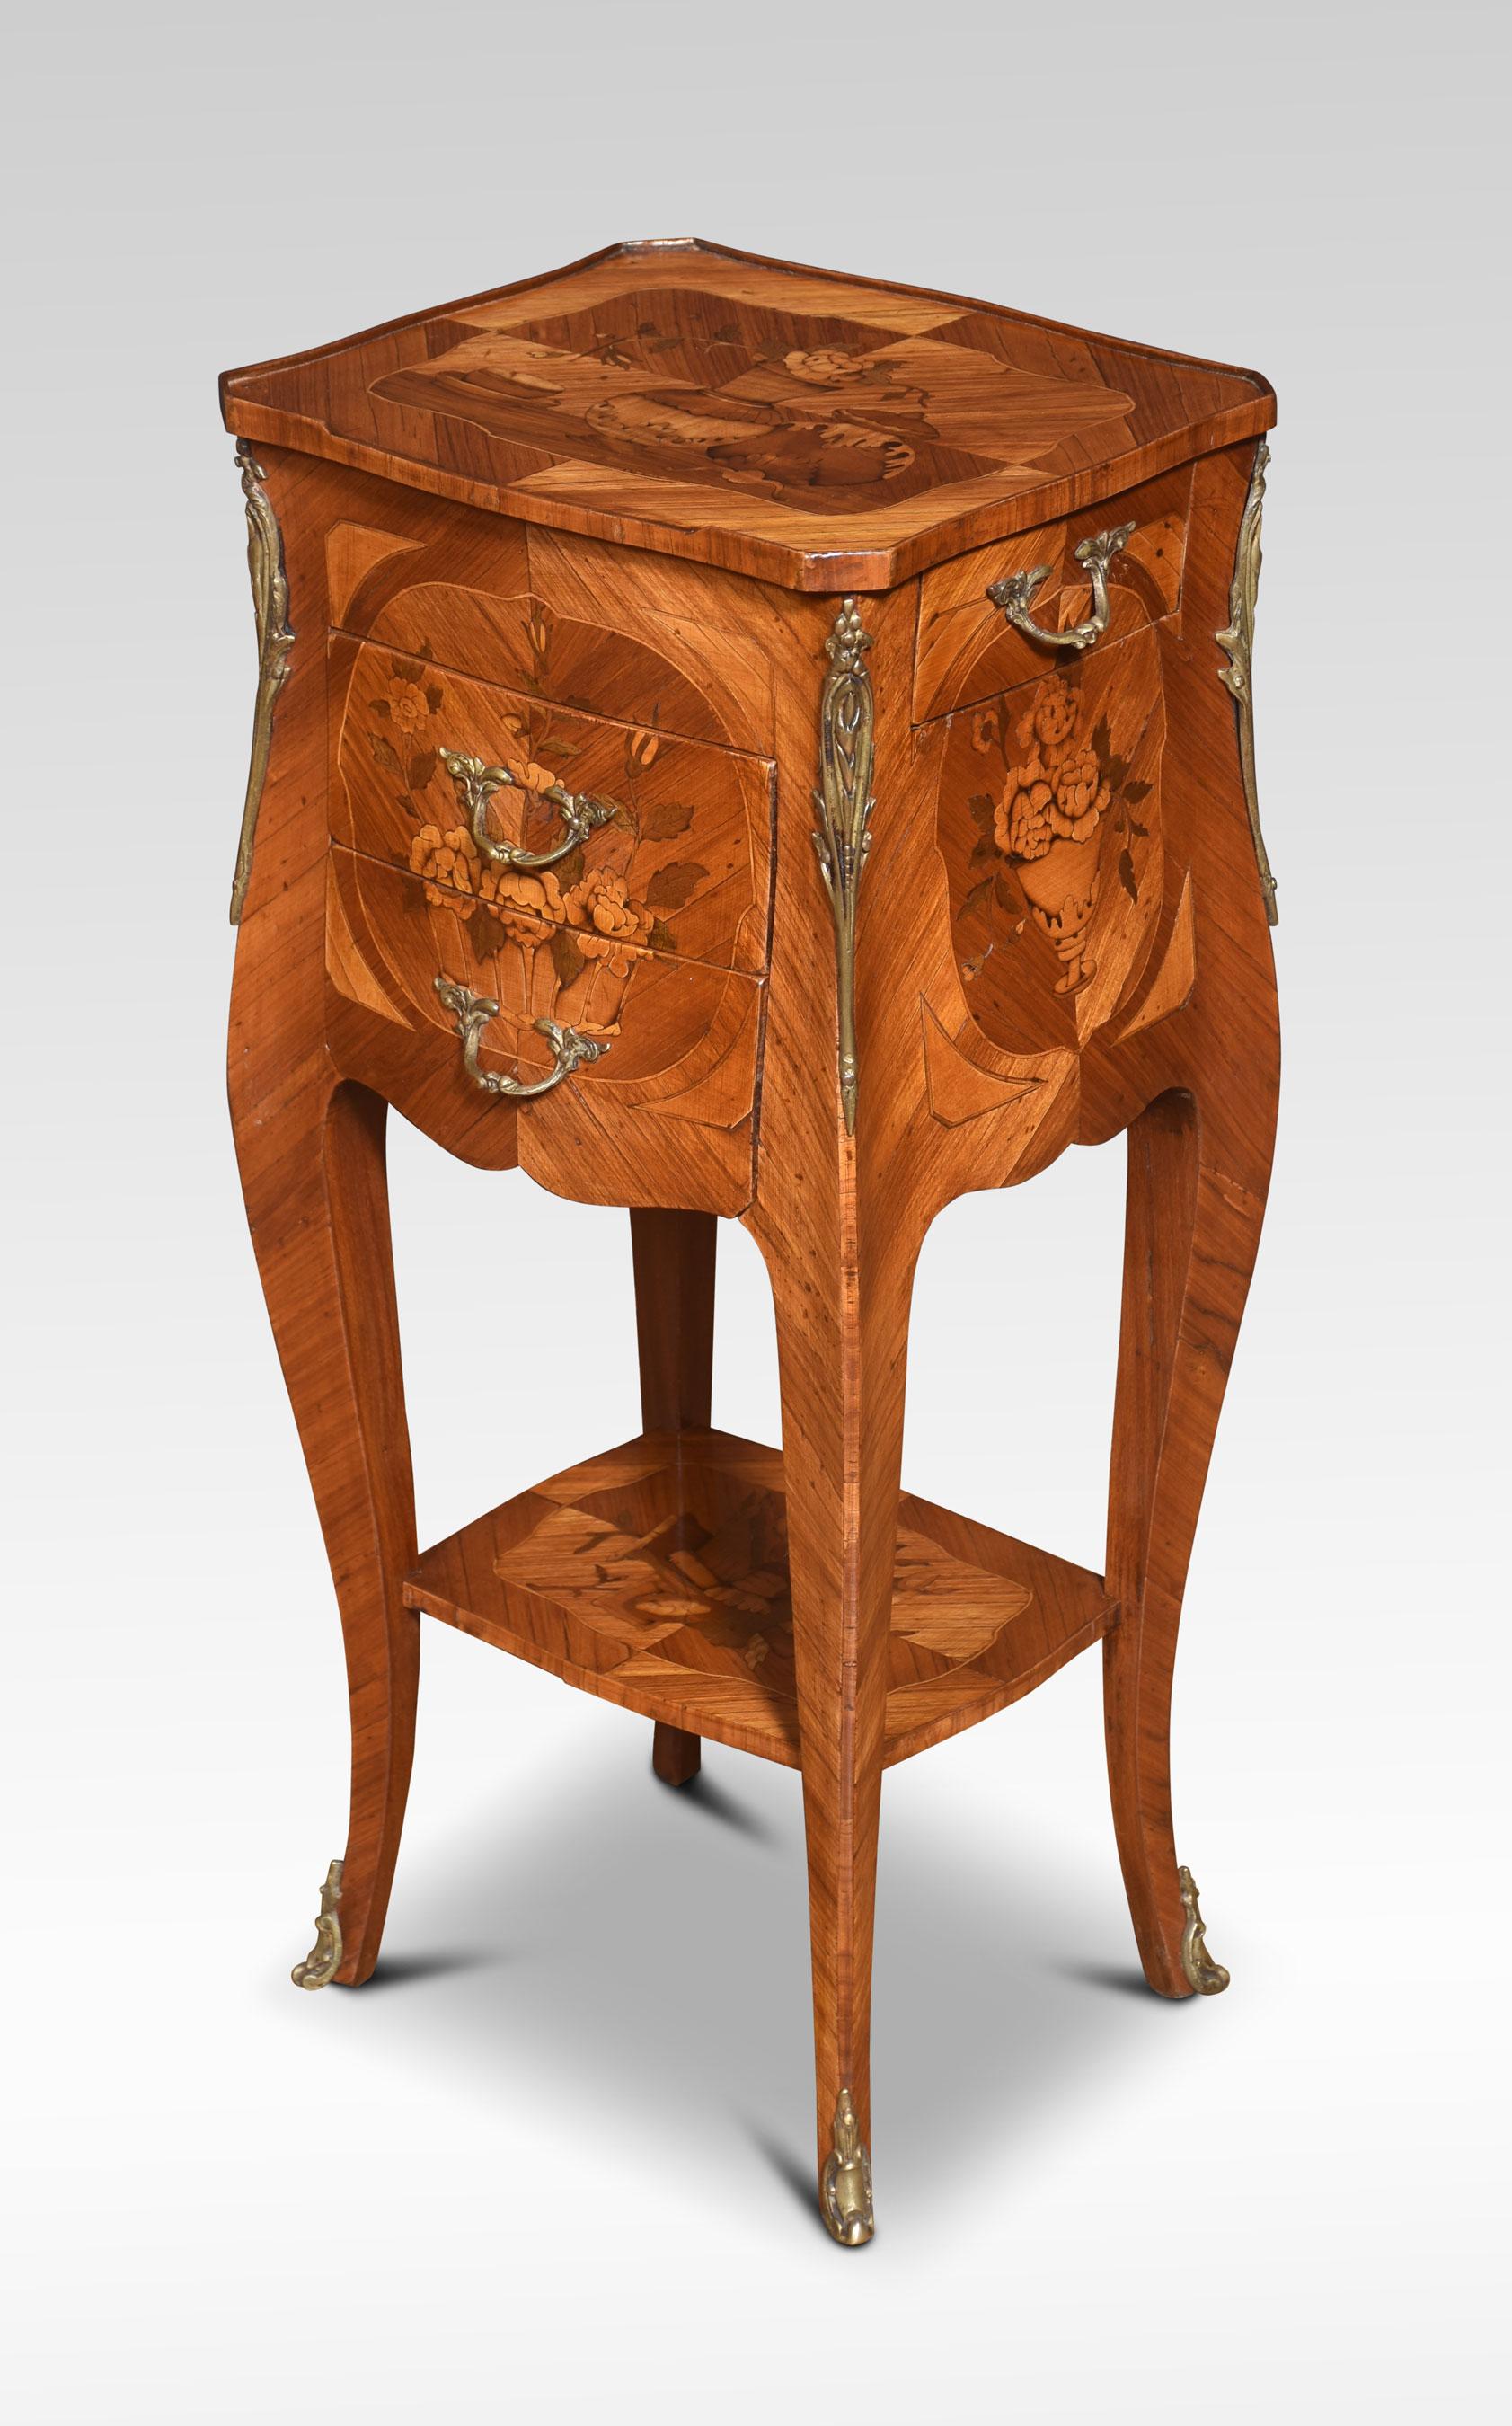 Pair of bedside chests. The marquetry inlaid tops having canted corners above two frieze drawers, and two small side drawers. All raised on slender cabriole legs united by under tier.
Dimensions
Height 27 Inches
Width 12.5 Inches
Depth 11 Inches